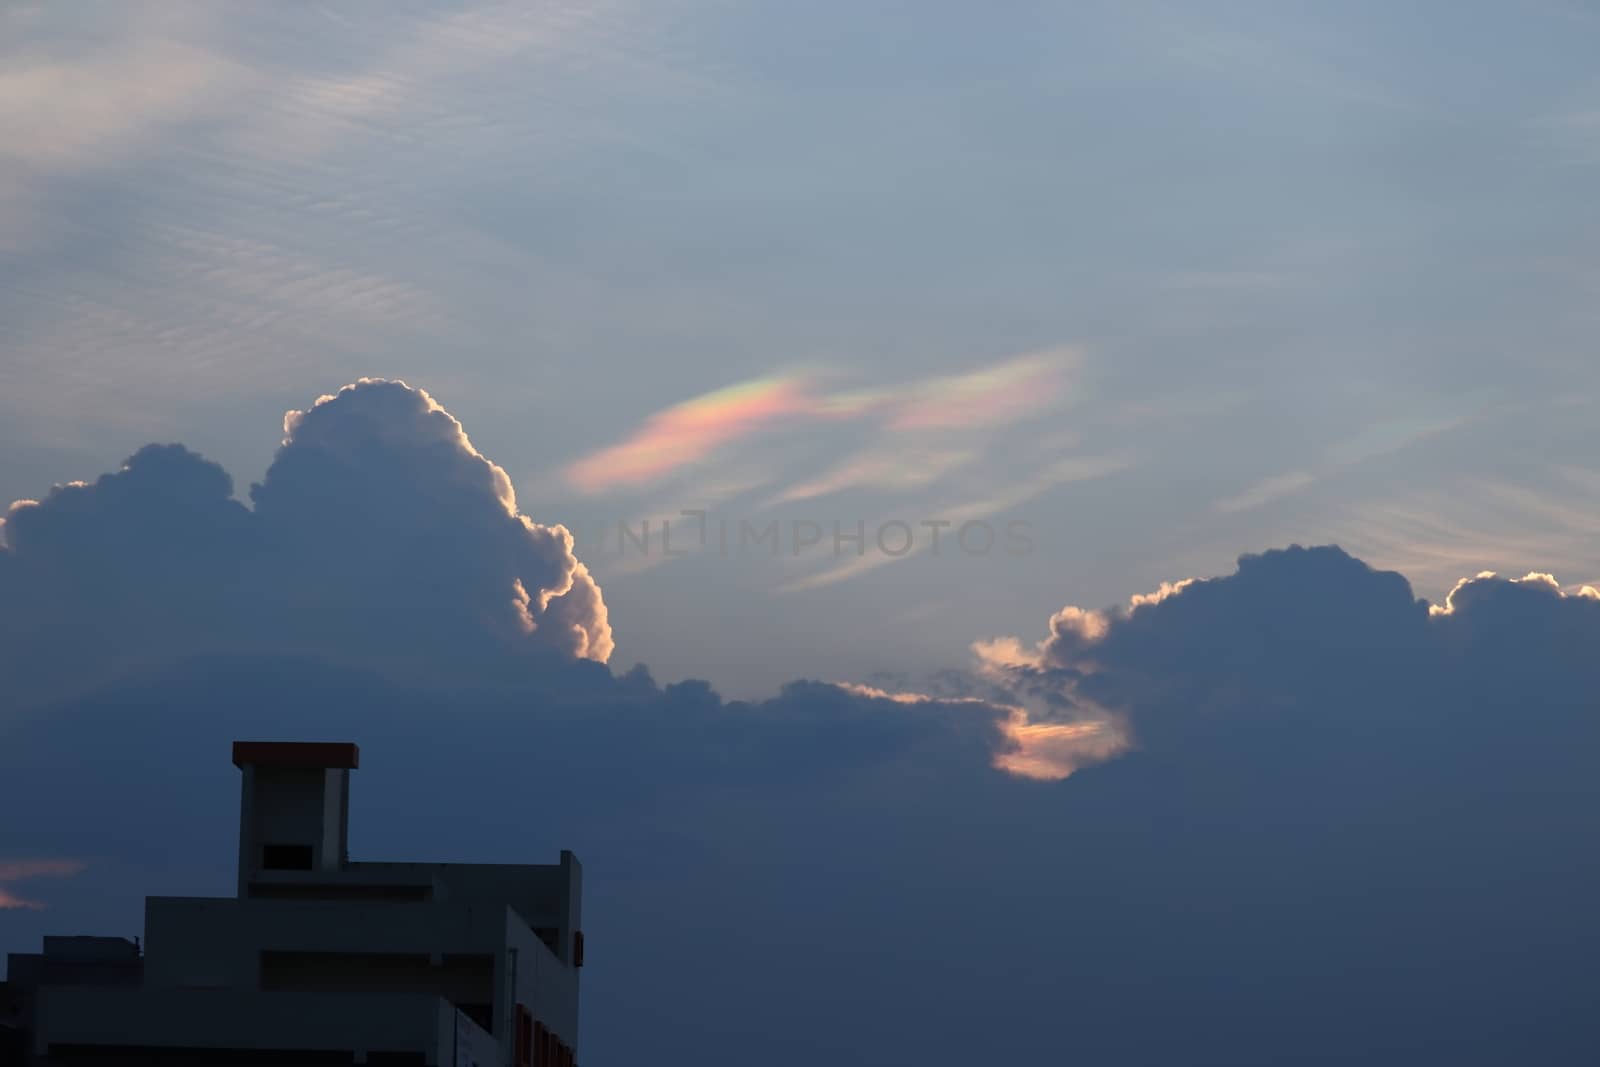 At sunset, the cloud appears in seven colors